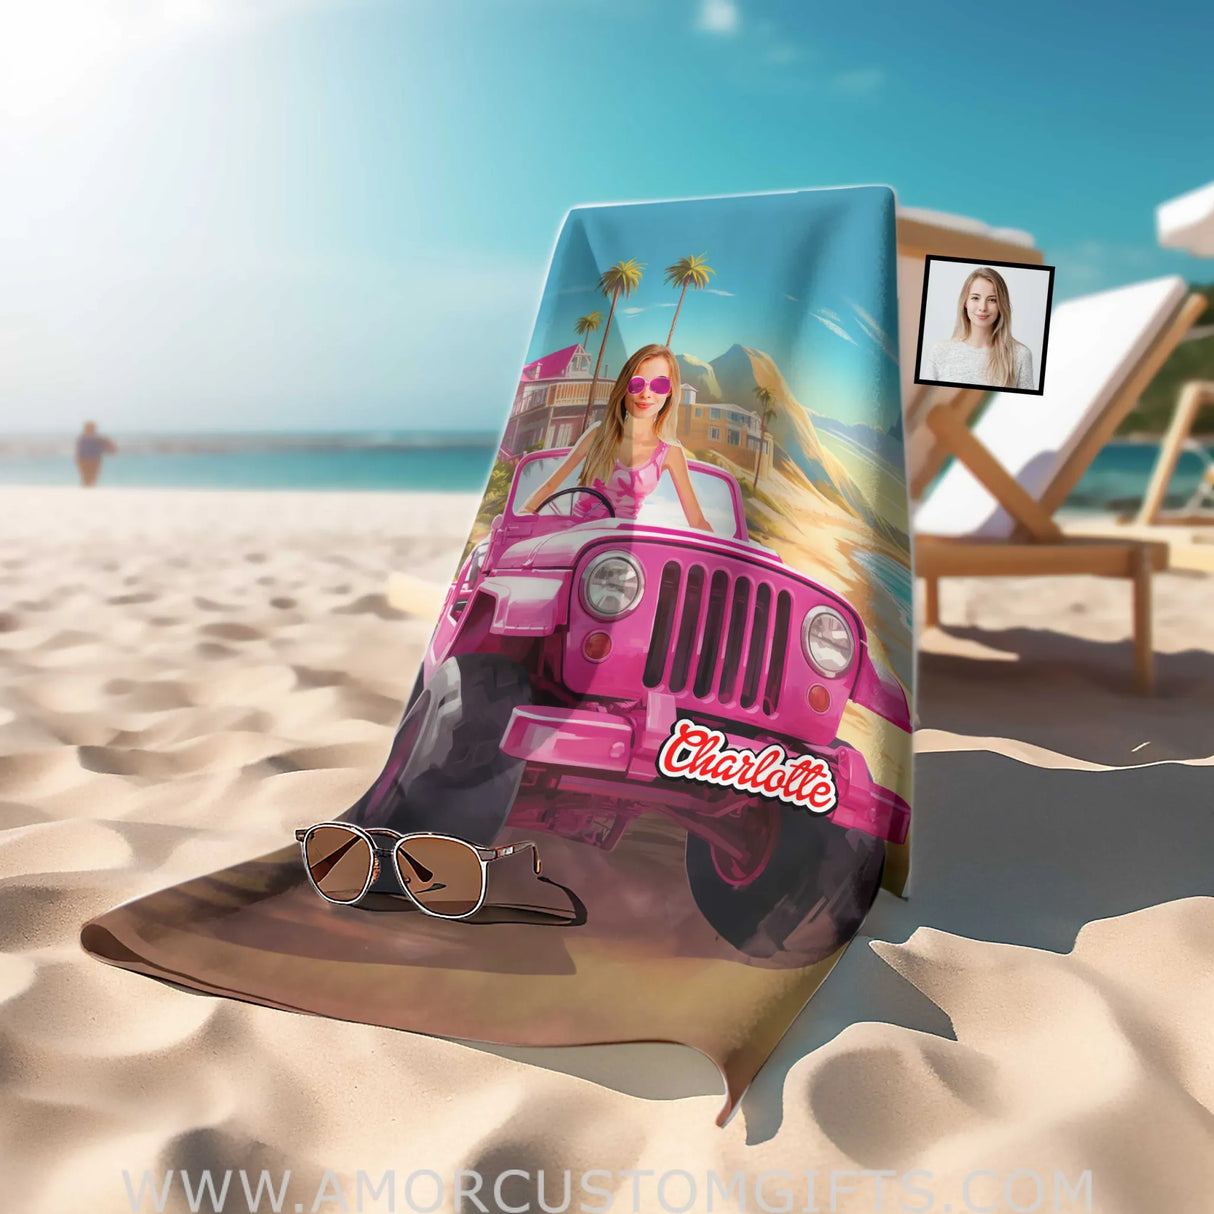 Towels Personalized Face & Name Summer Barbi Jeep Truck Beach Beach Towel